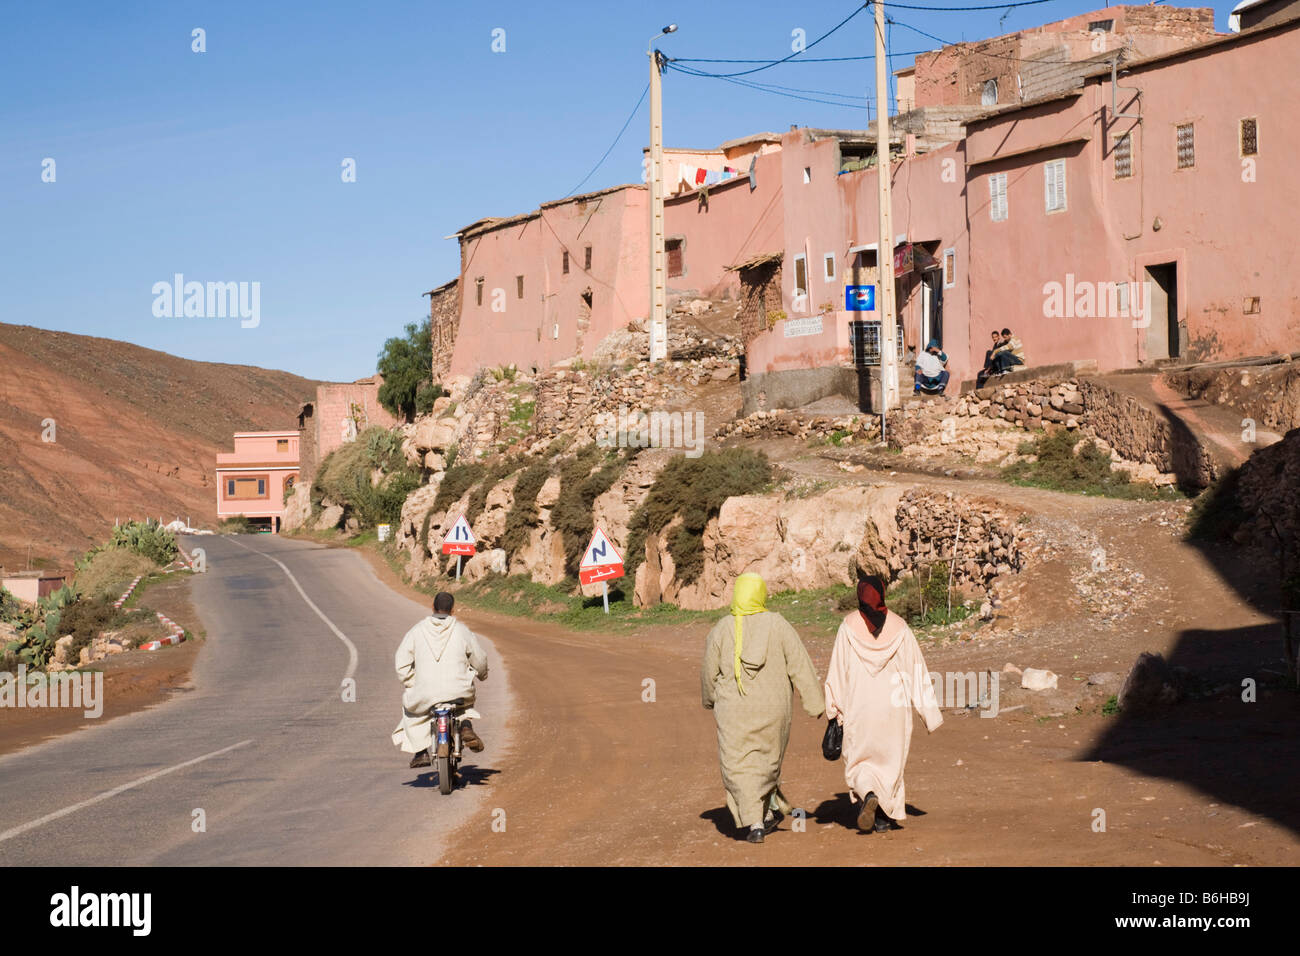 Typical Berber mountain village scene with two traditionally dressed women walking beside road. Tahanaoute Asni Valley Morocco Stock Photo